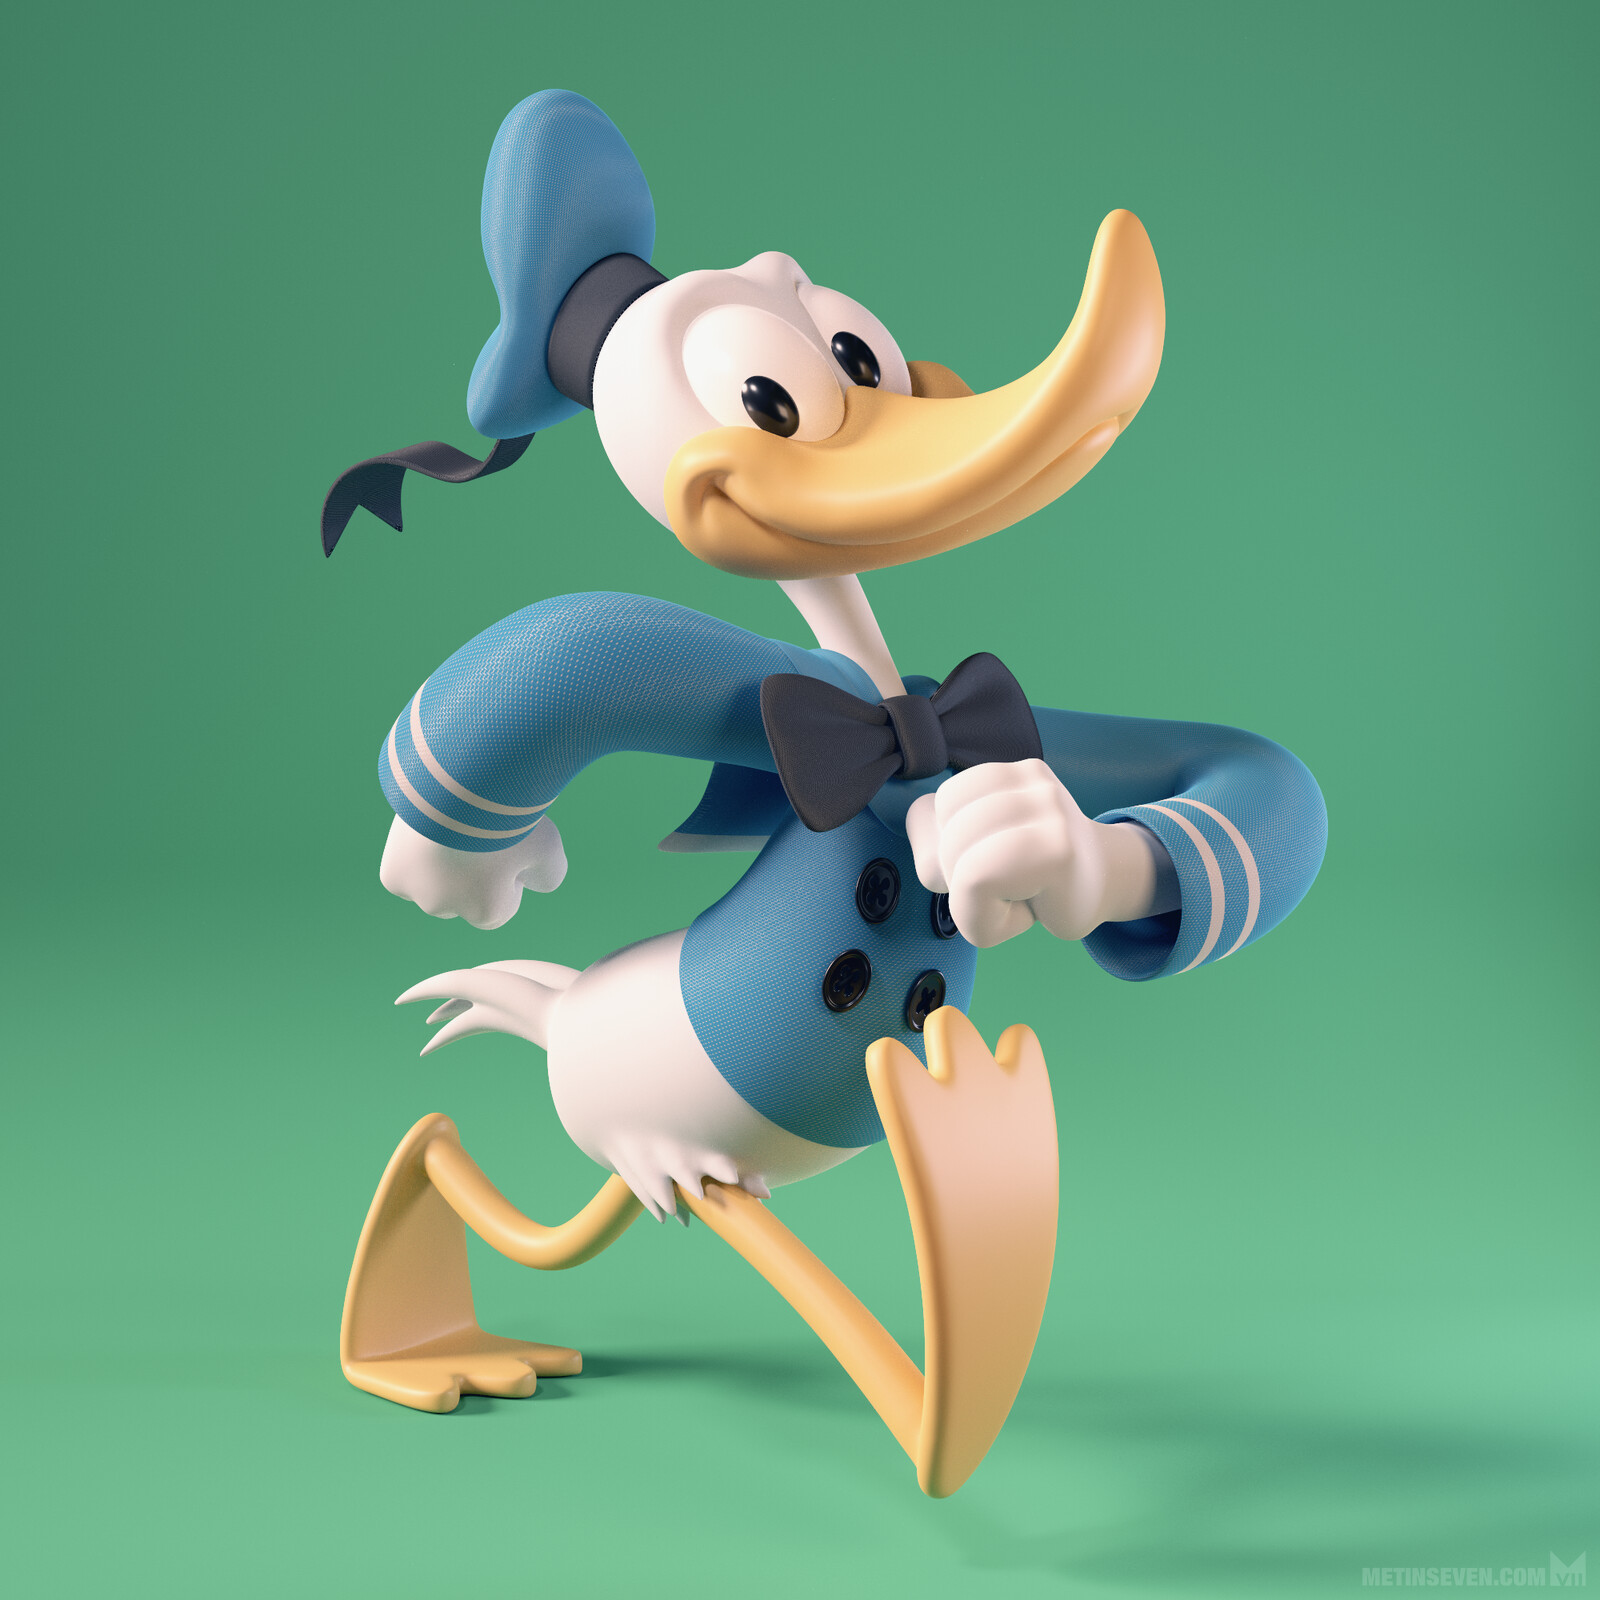 Donald! 🦆😃 | Based on a sketch by Mark Christiansen